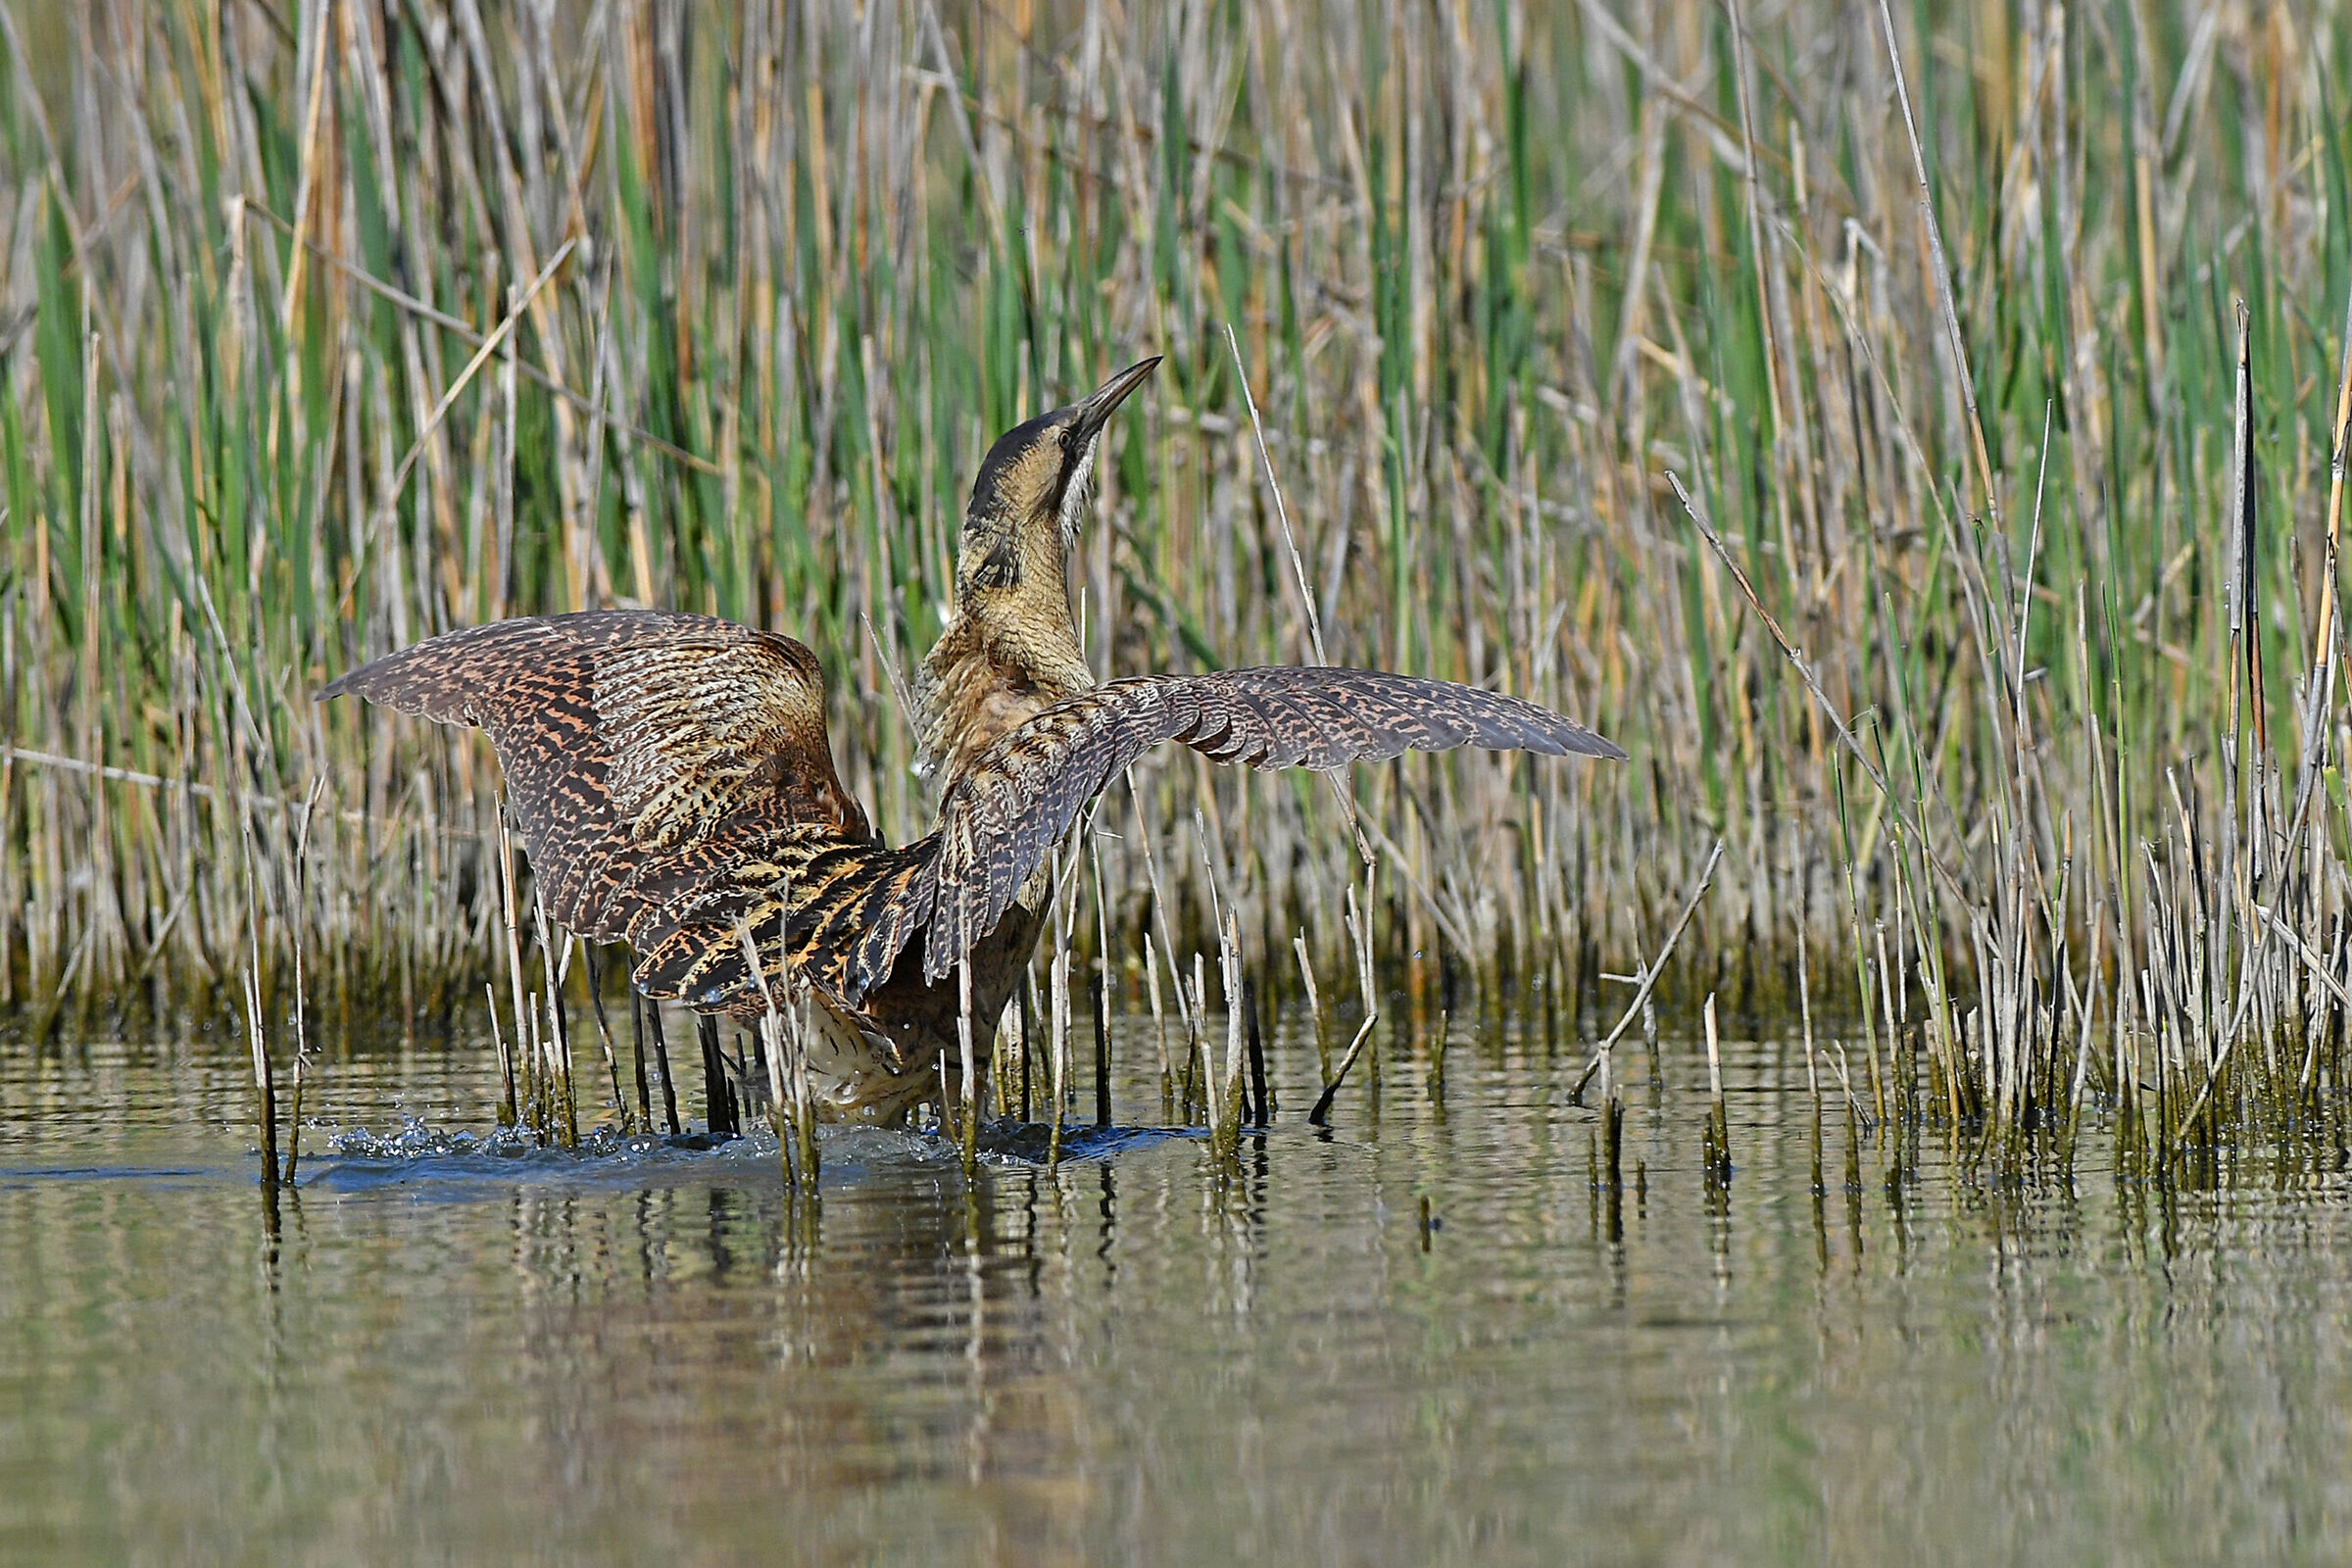 Stories of Feathers 3 (Bittern)...